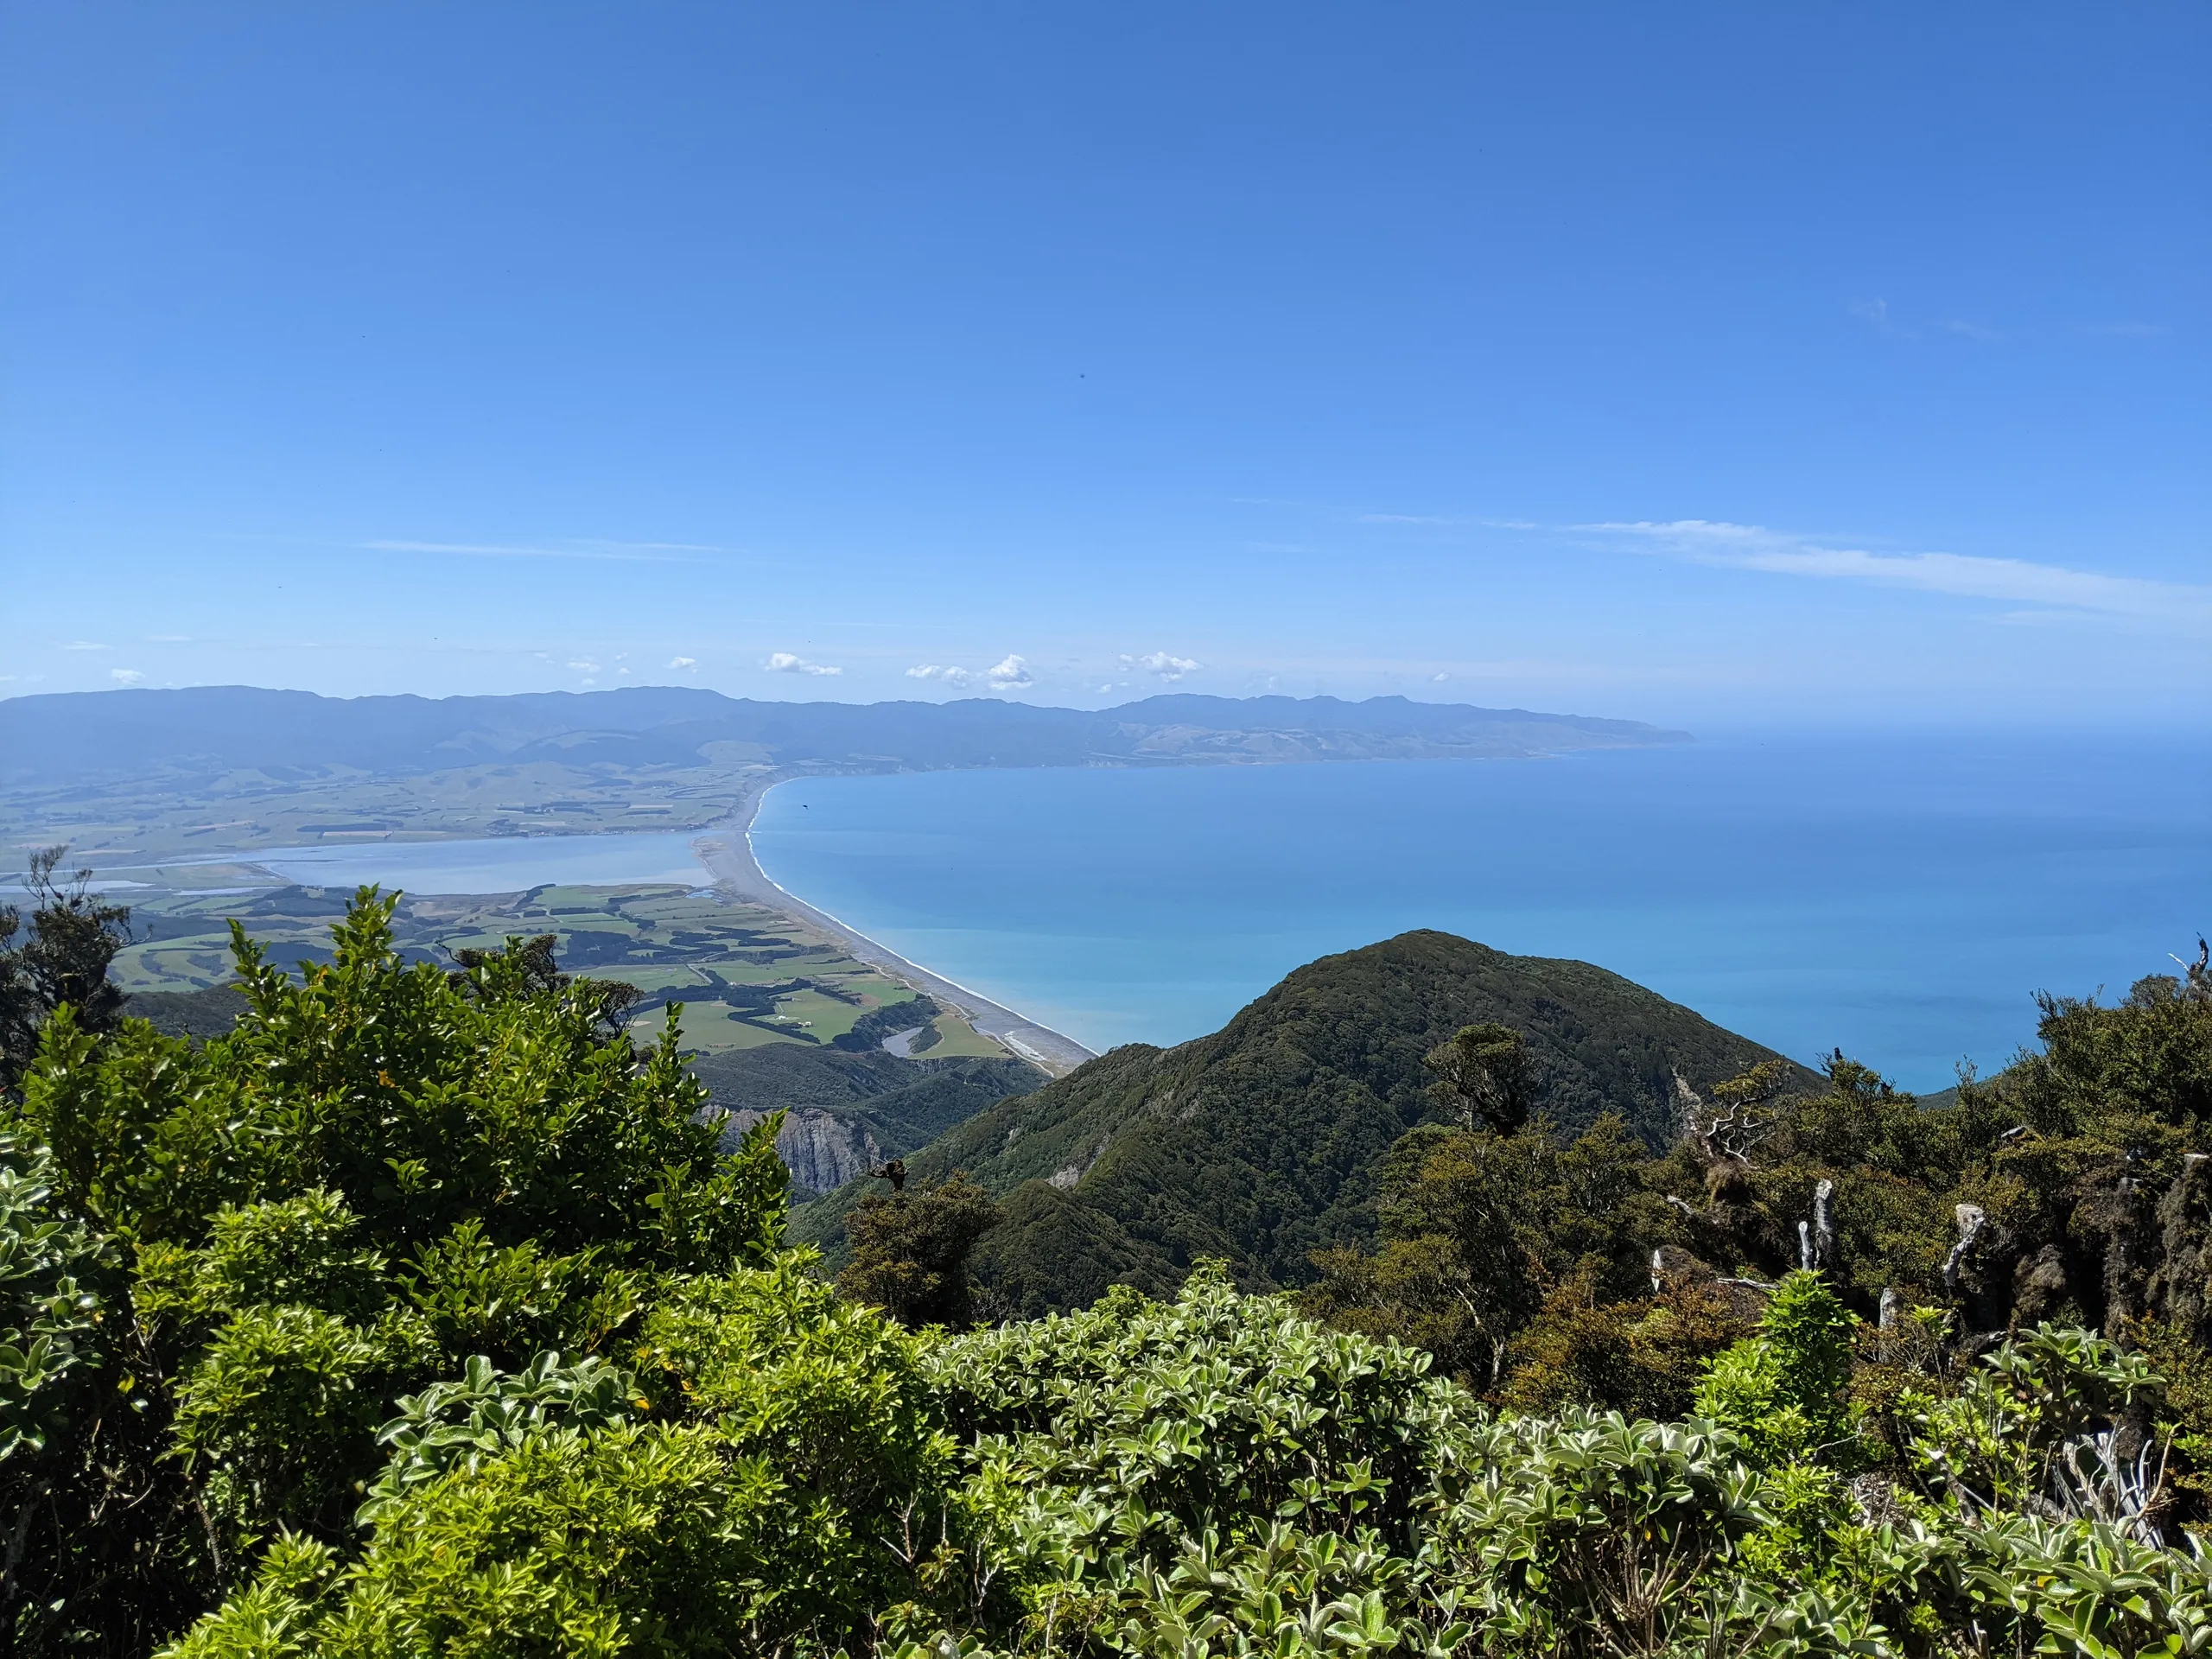 The clearest view is that across Palliser Bay and out to Aorangi Range on the horizon. It's clear that this is the dividing line between Wellington and the Wairarapa!